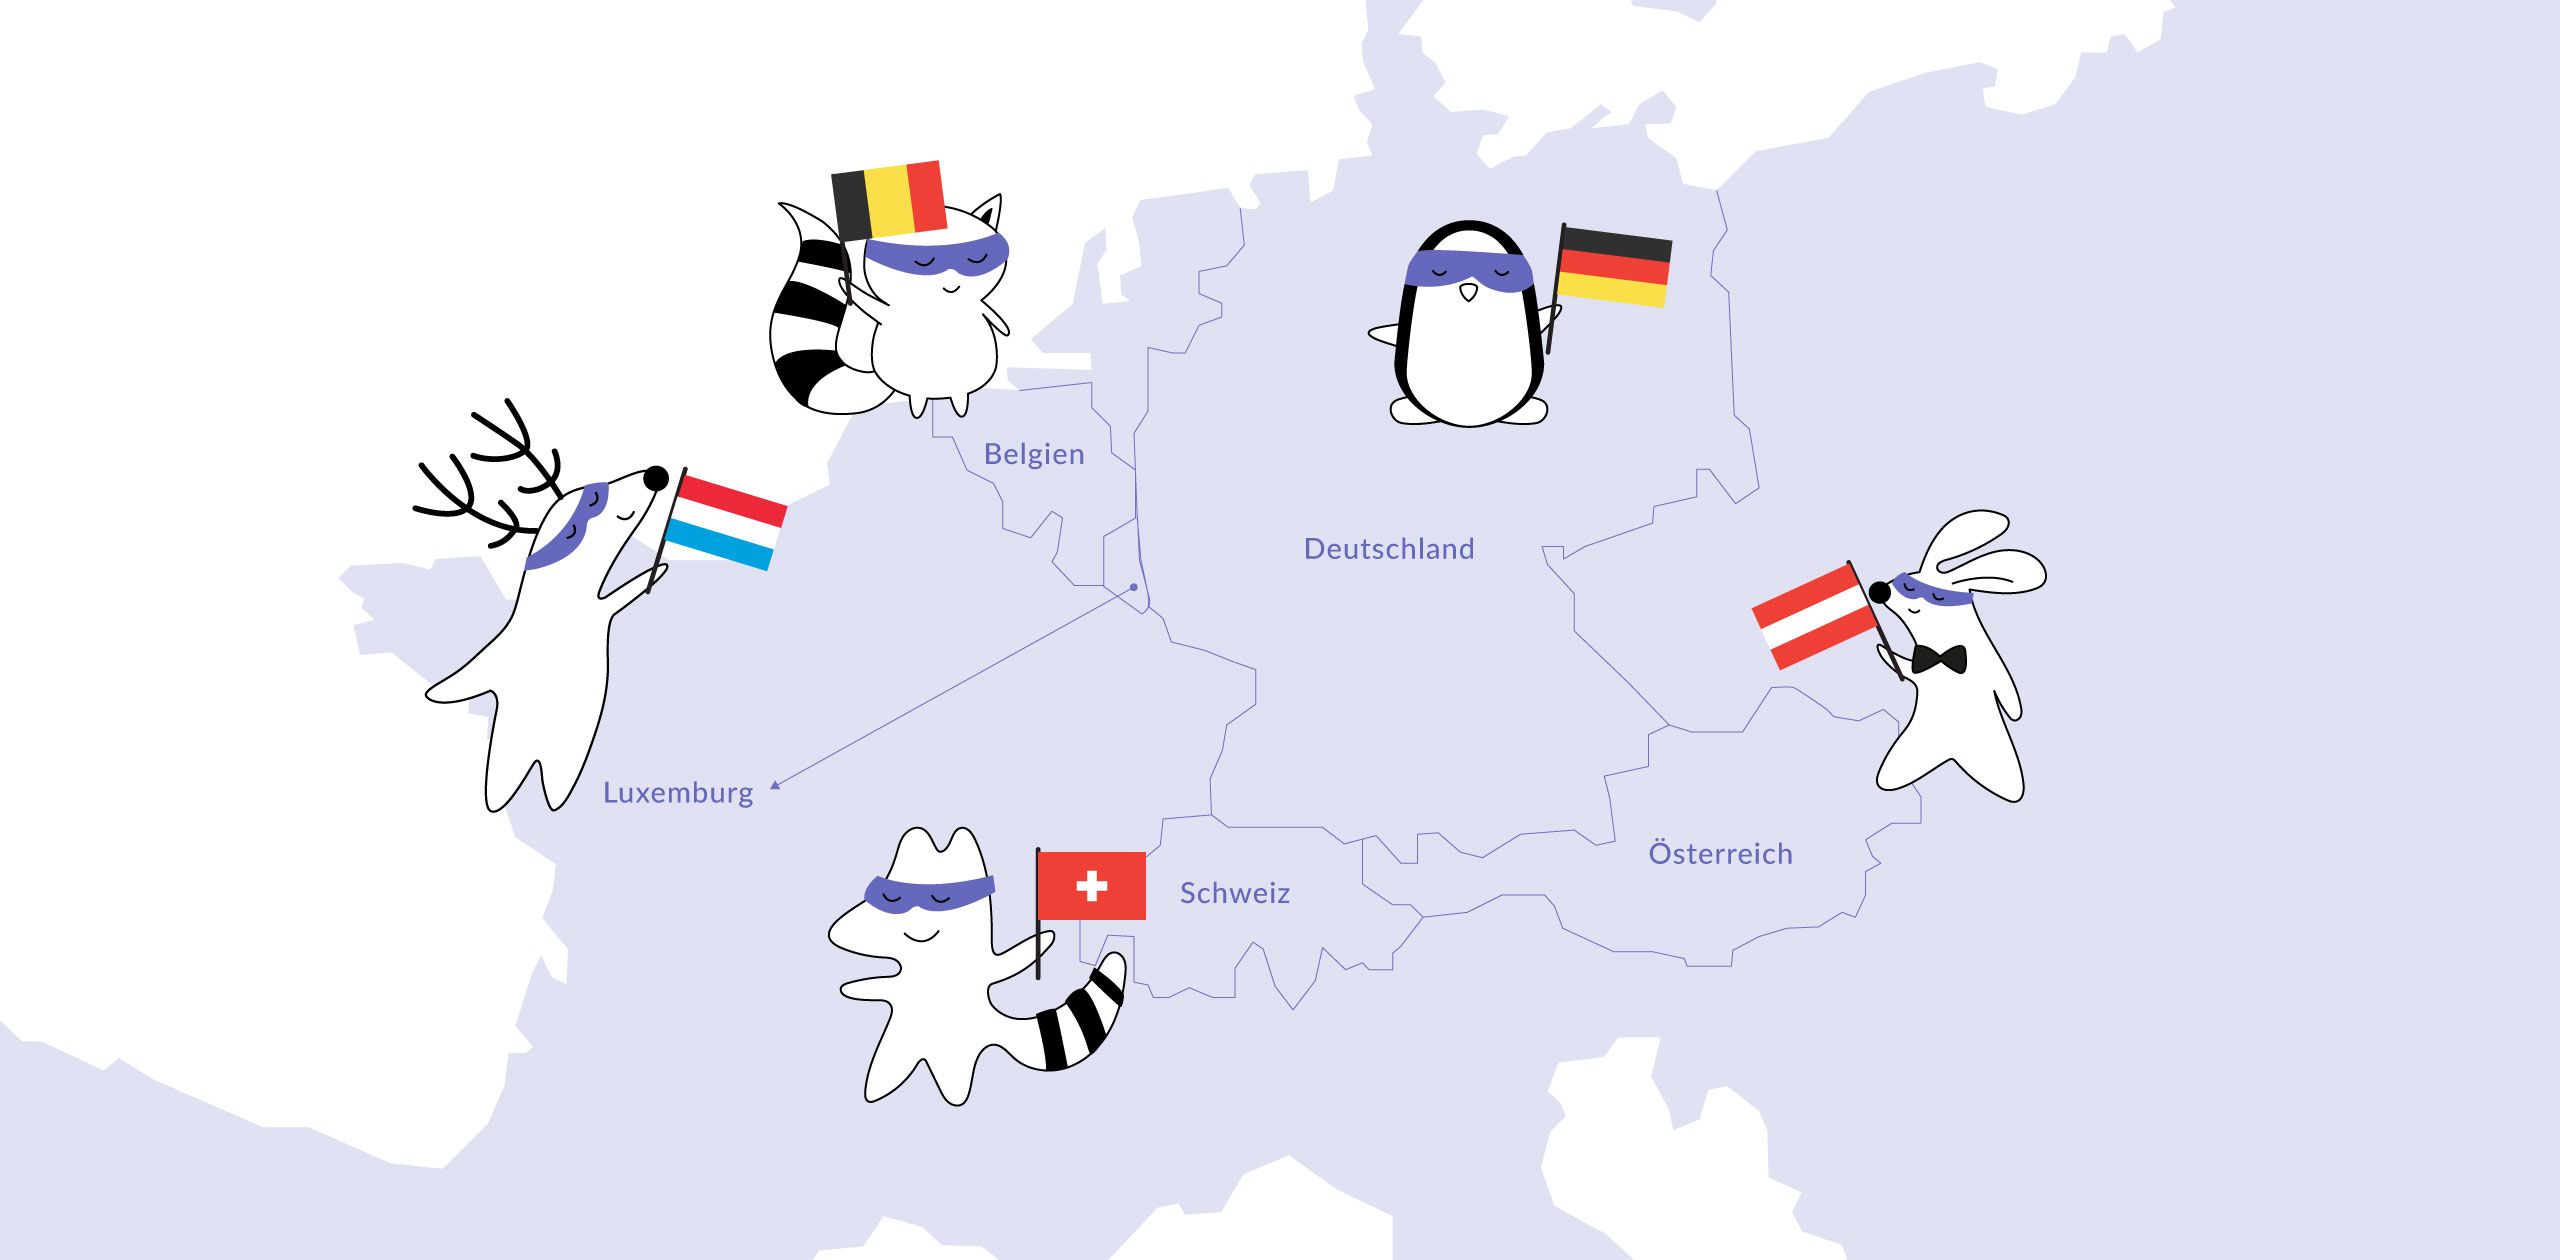 Characters from different German-speaking countries